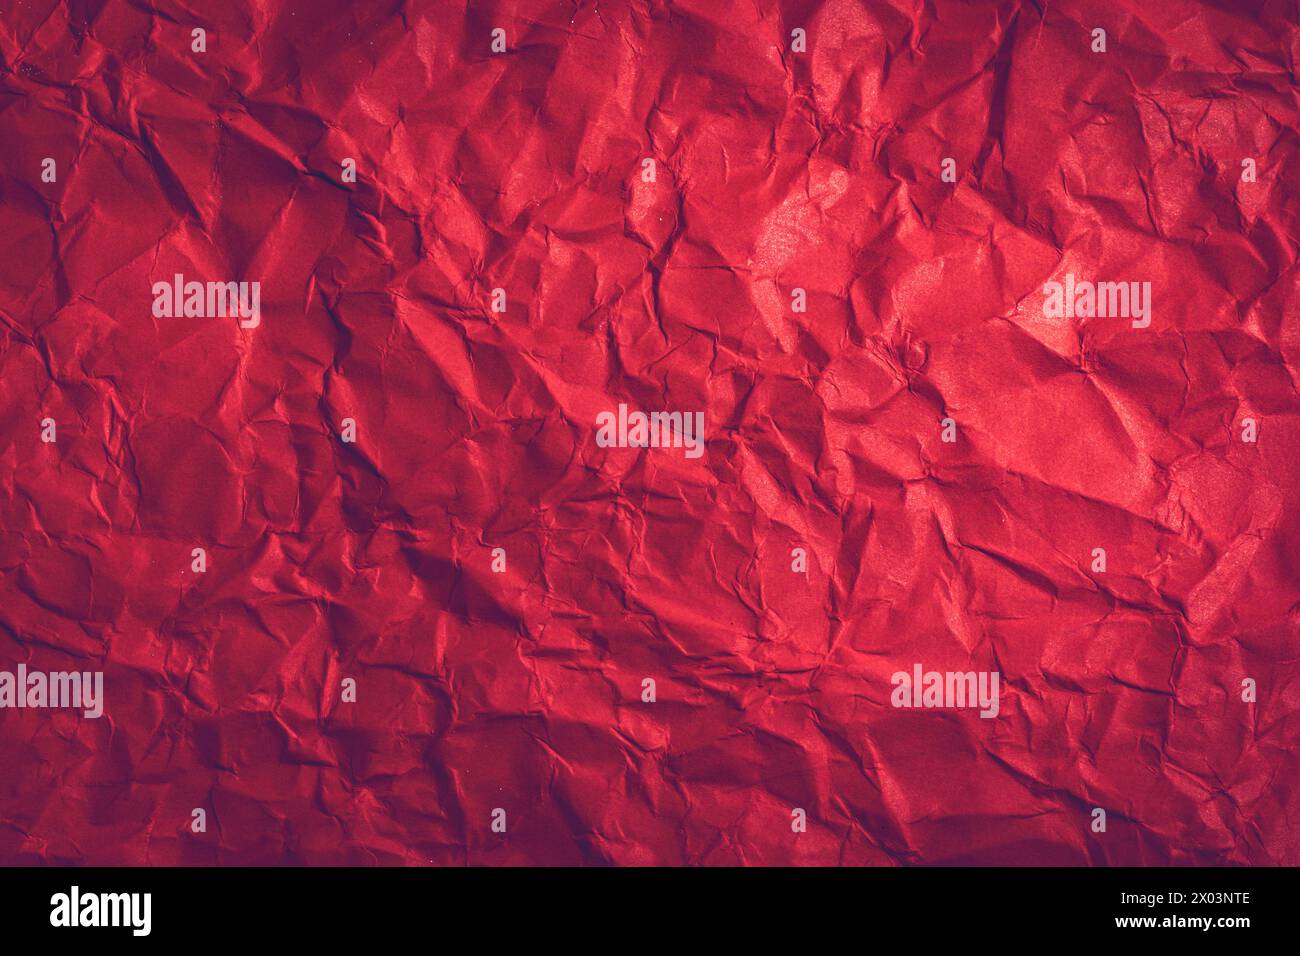 Red Paper Texture background. Crumpled Red paper abstract shape background. Stock Photo